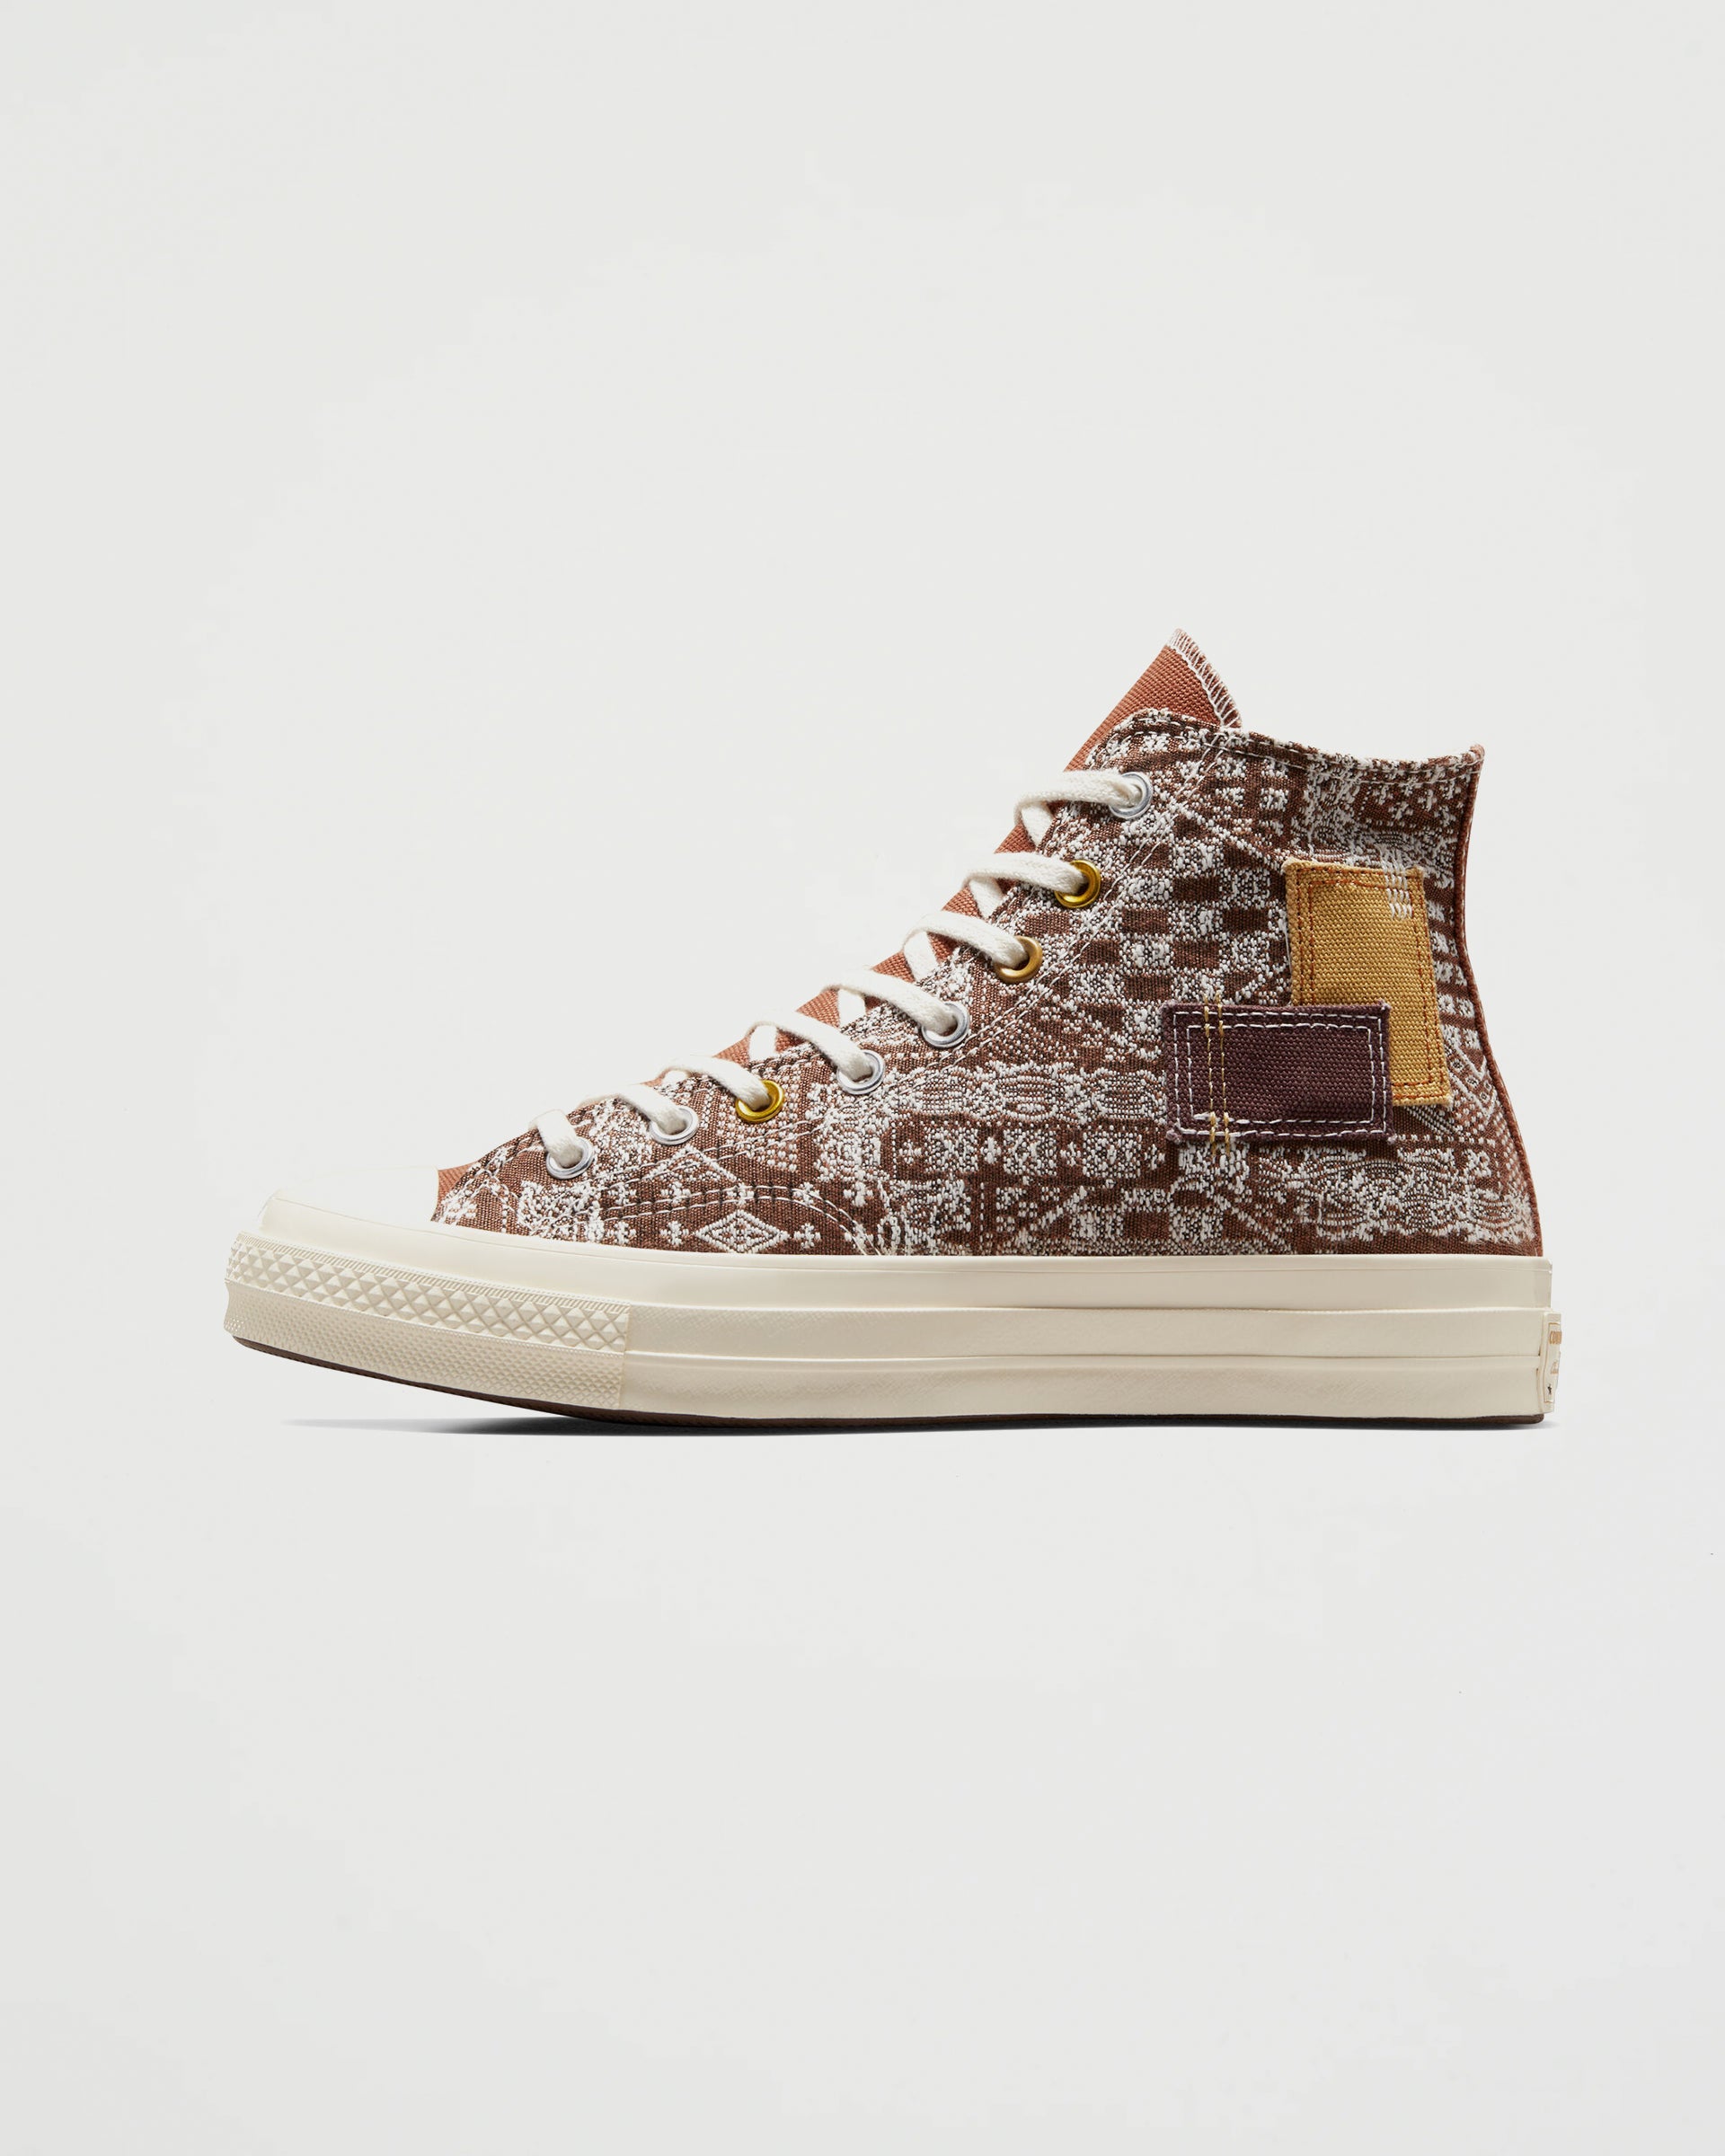 Converse Chuck 70 Hi Patchwork Tawny Owl Shoes Sneakers Unisex